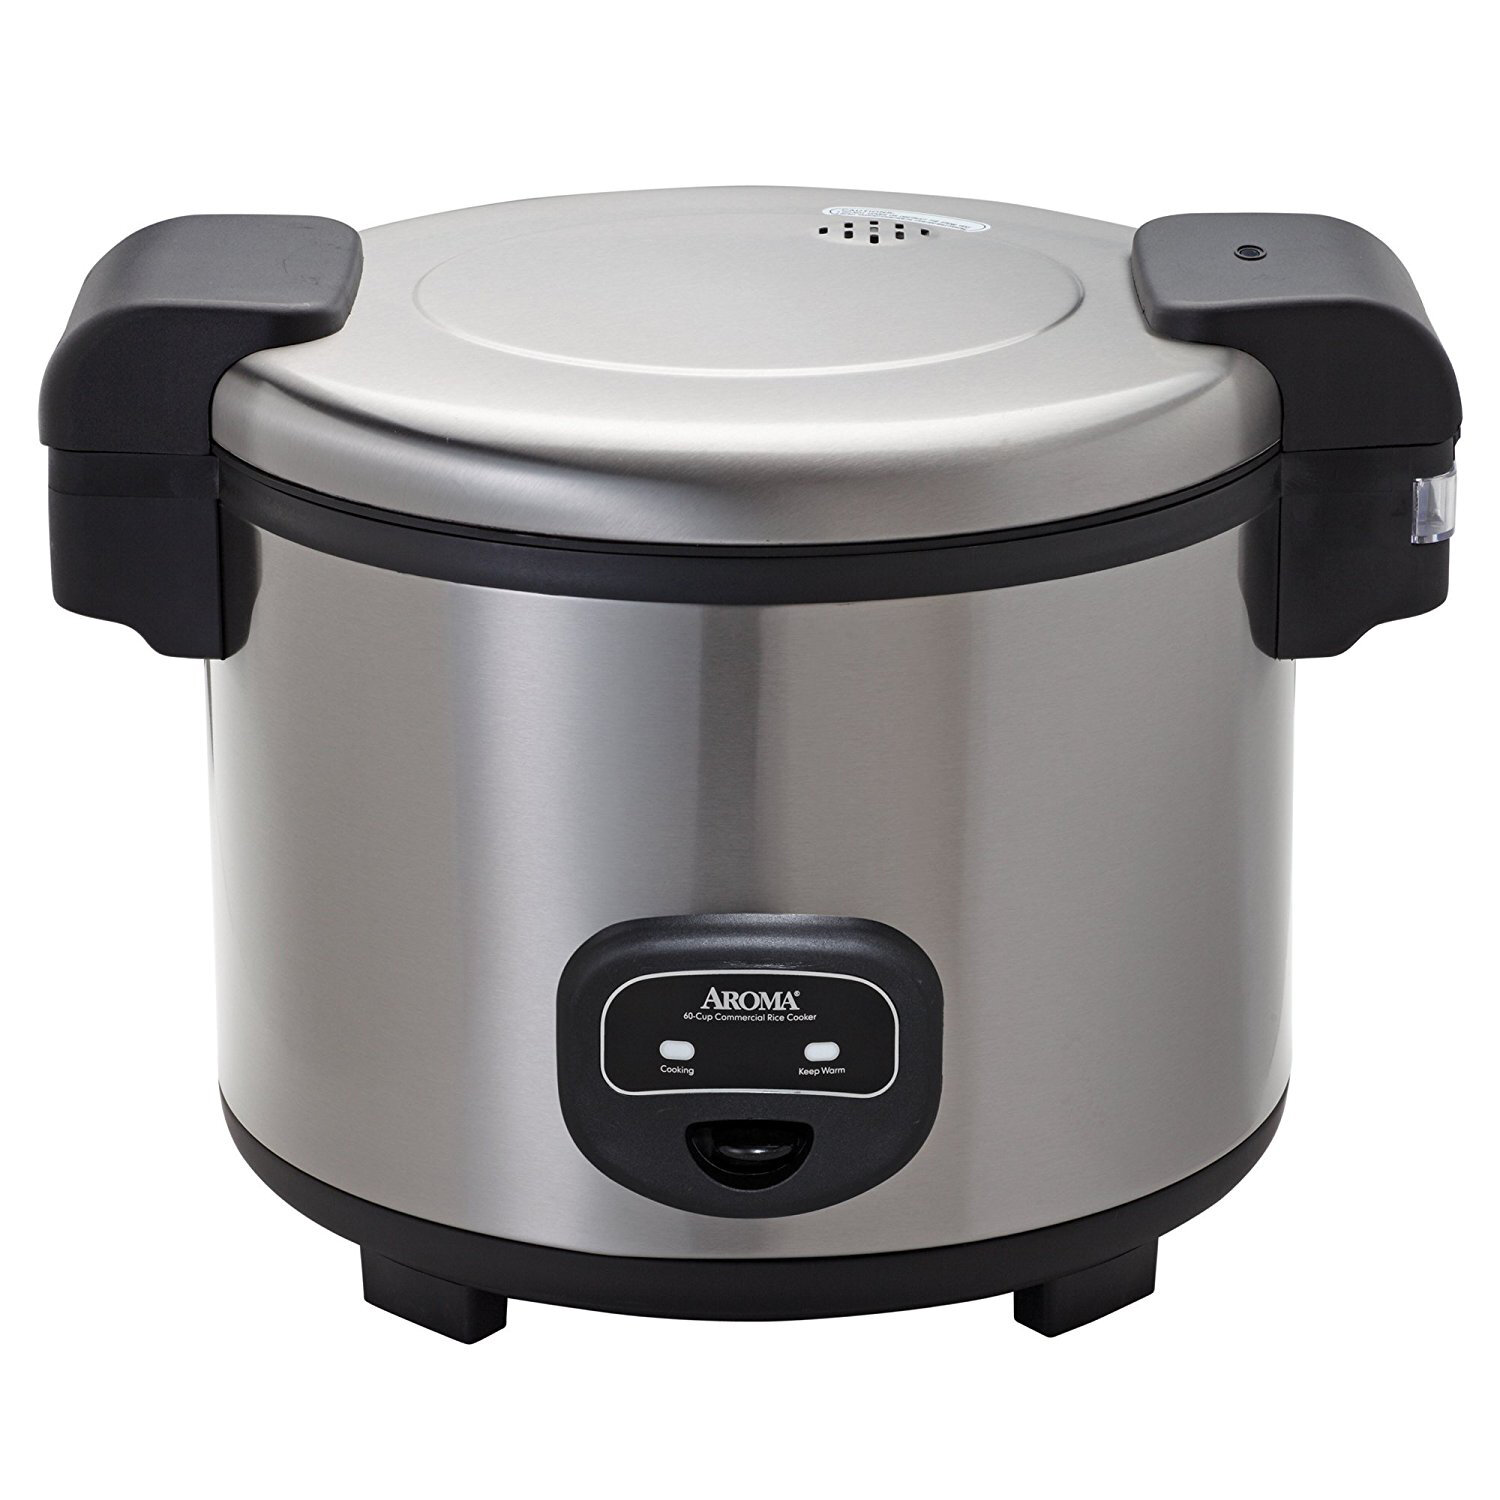 Aroma 4 cup Rice Cooker vs Black + Decker 3 cup Rice Cooker